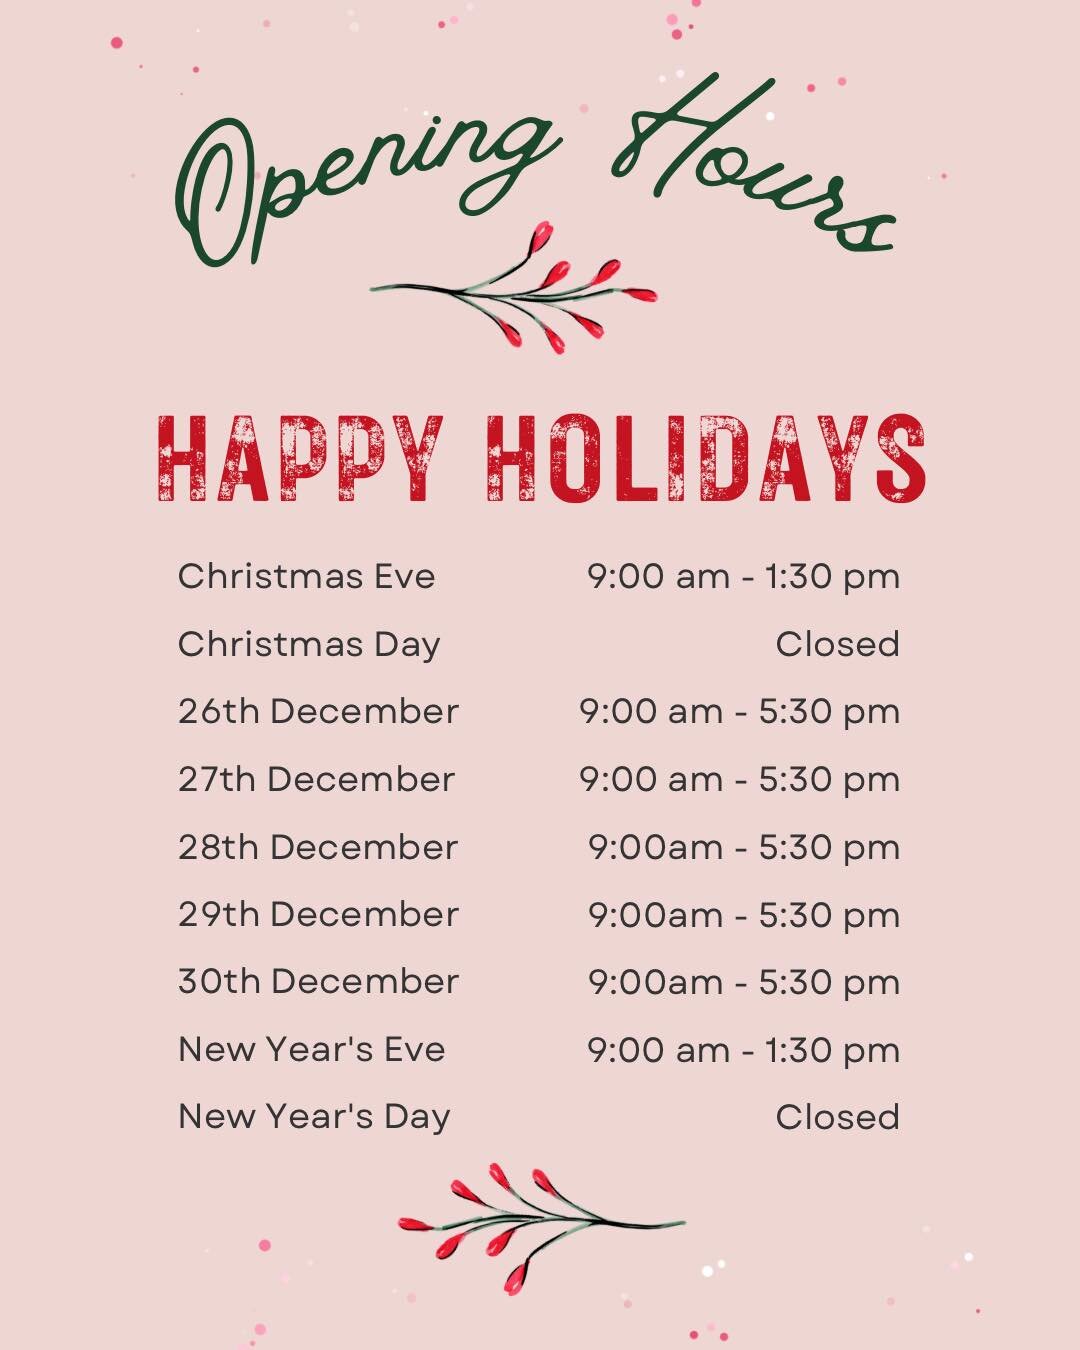 Here are our holiday hours for the rest of the year! We are still open until Christmas Day, so be sure to get some last minute gifts or treats for the holidays!